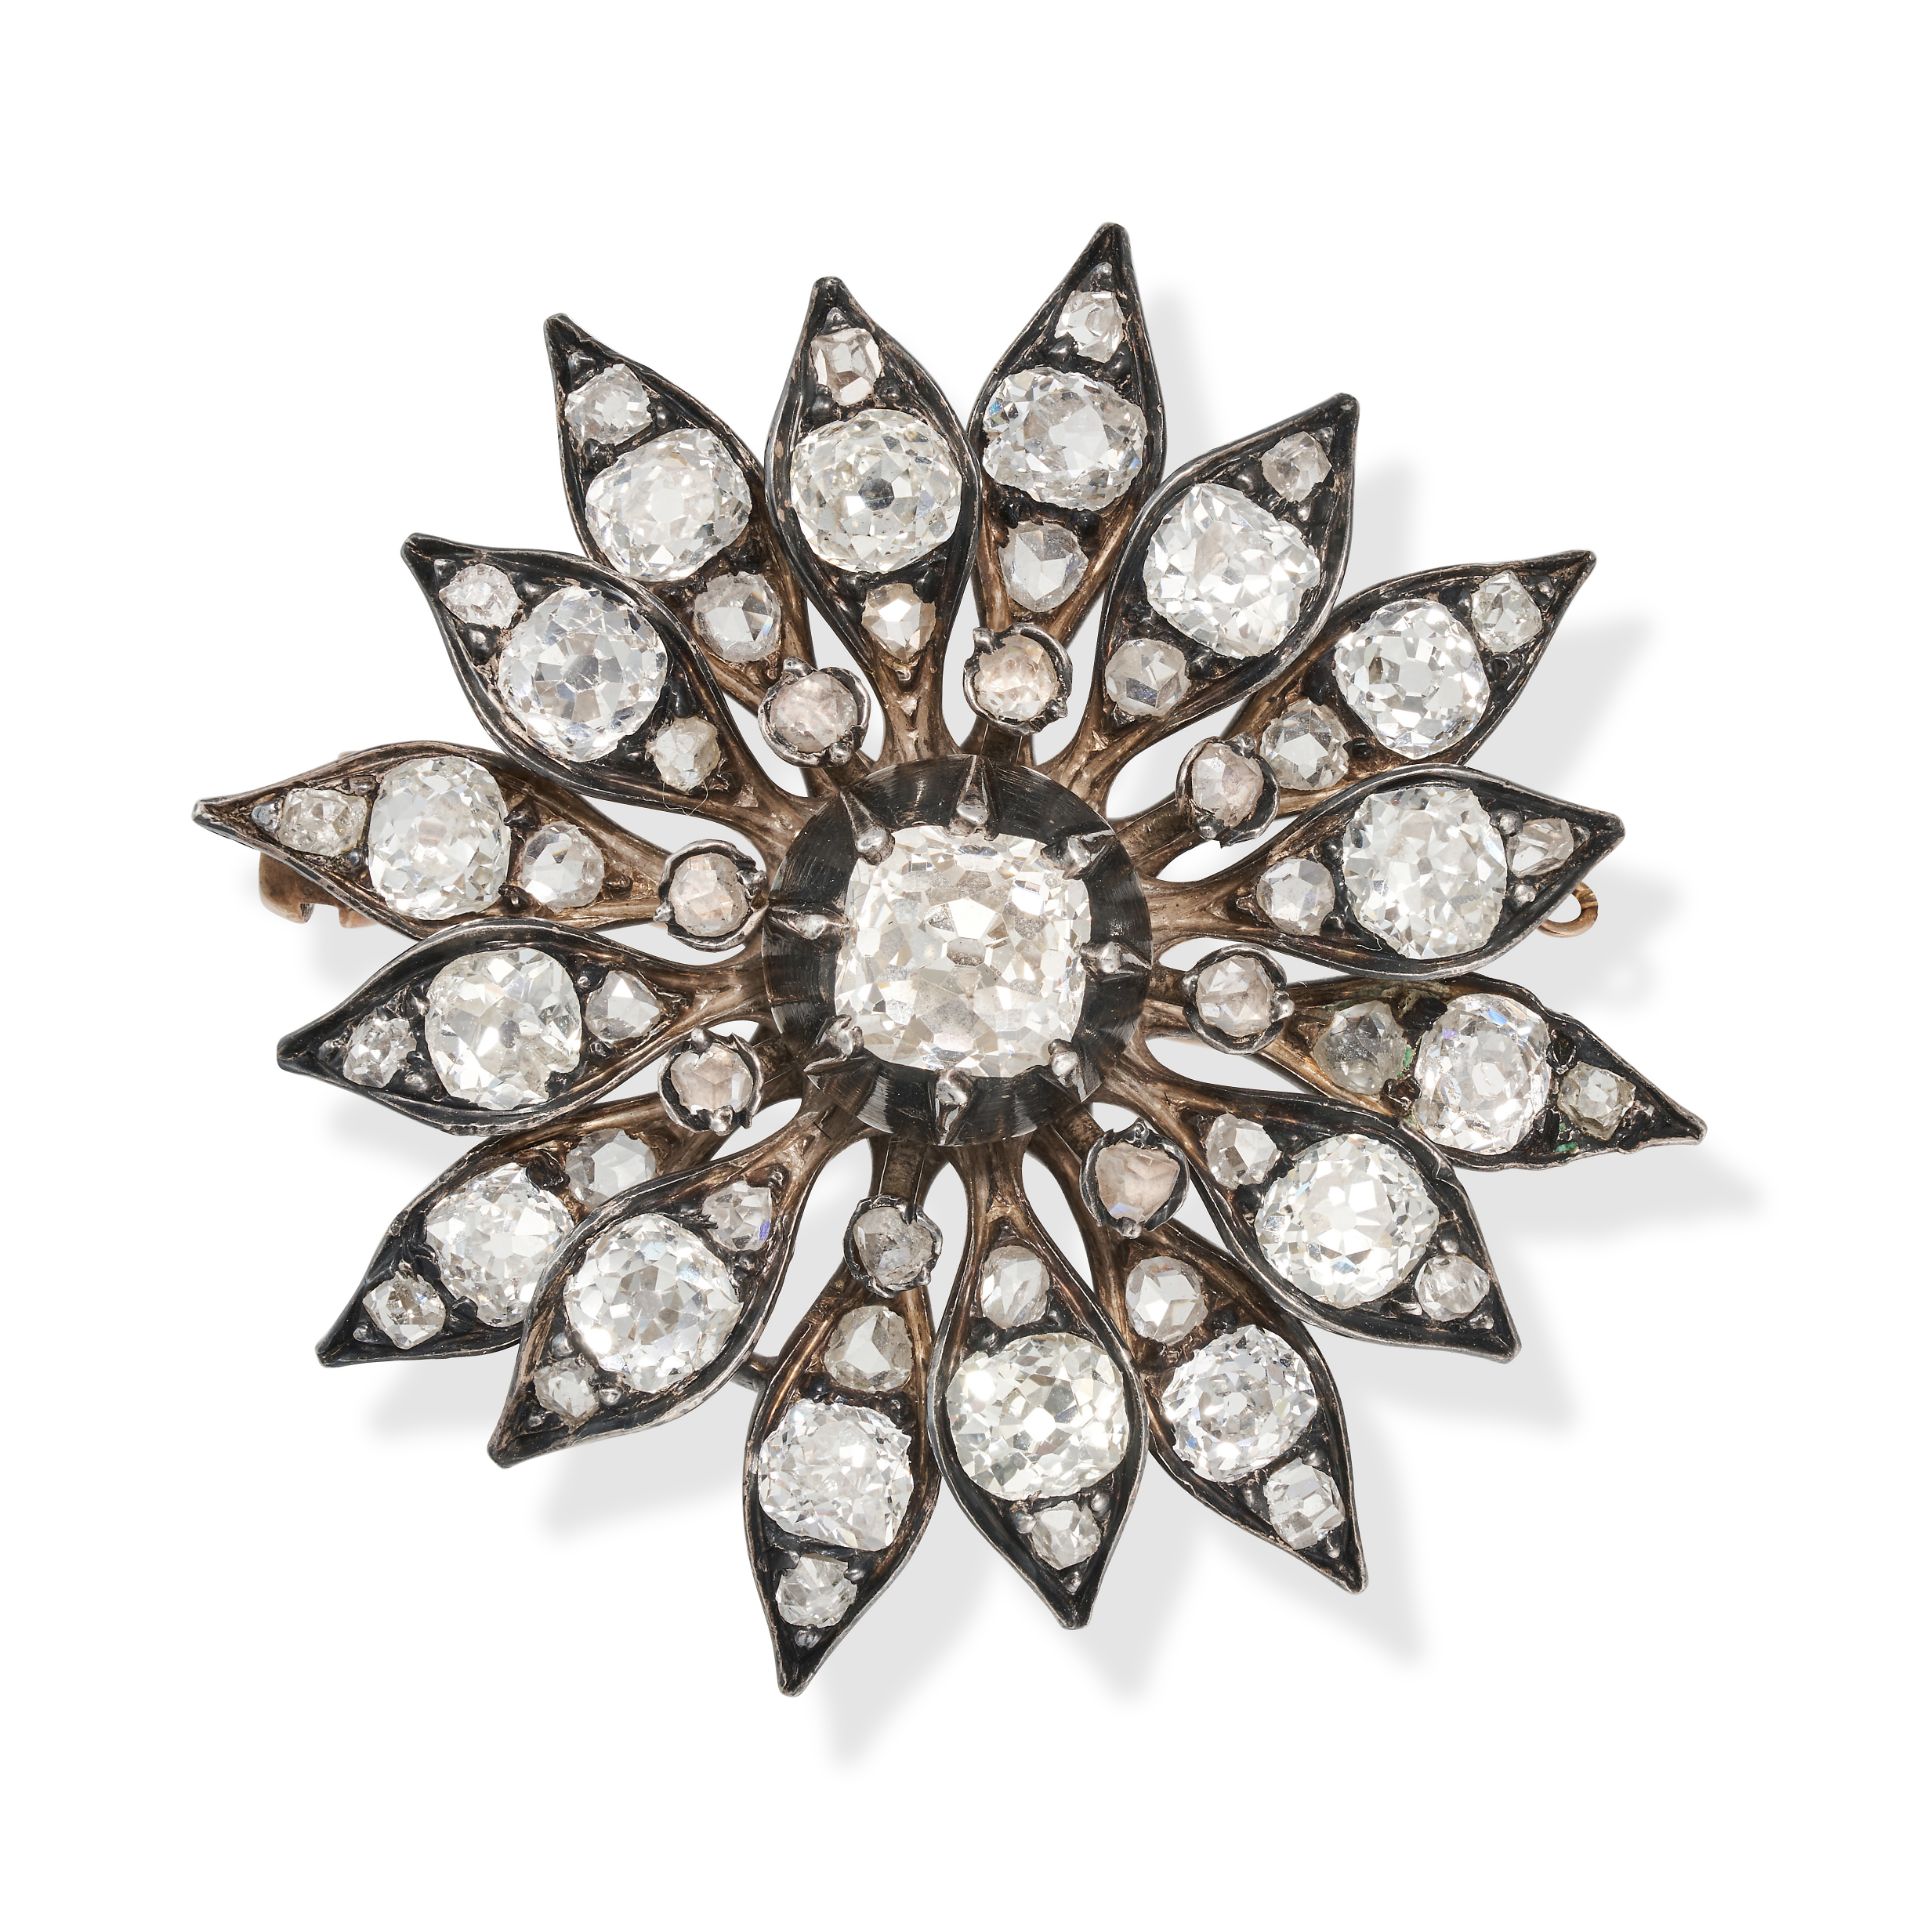 AN ANTIQUE DIAMOND FLOWER BROOCH in yellow gold and silver, designed as an articulated flower, se...